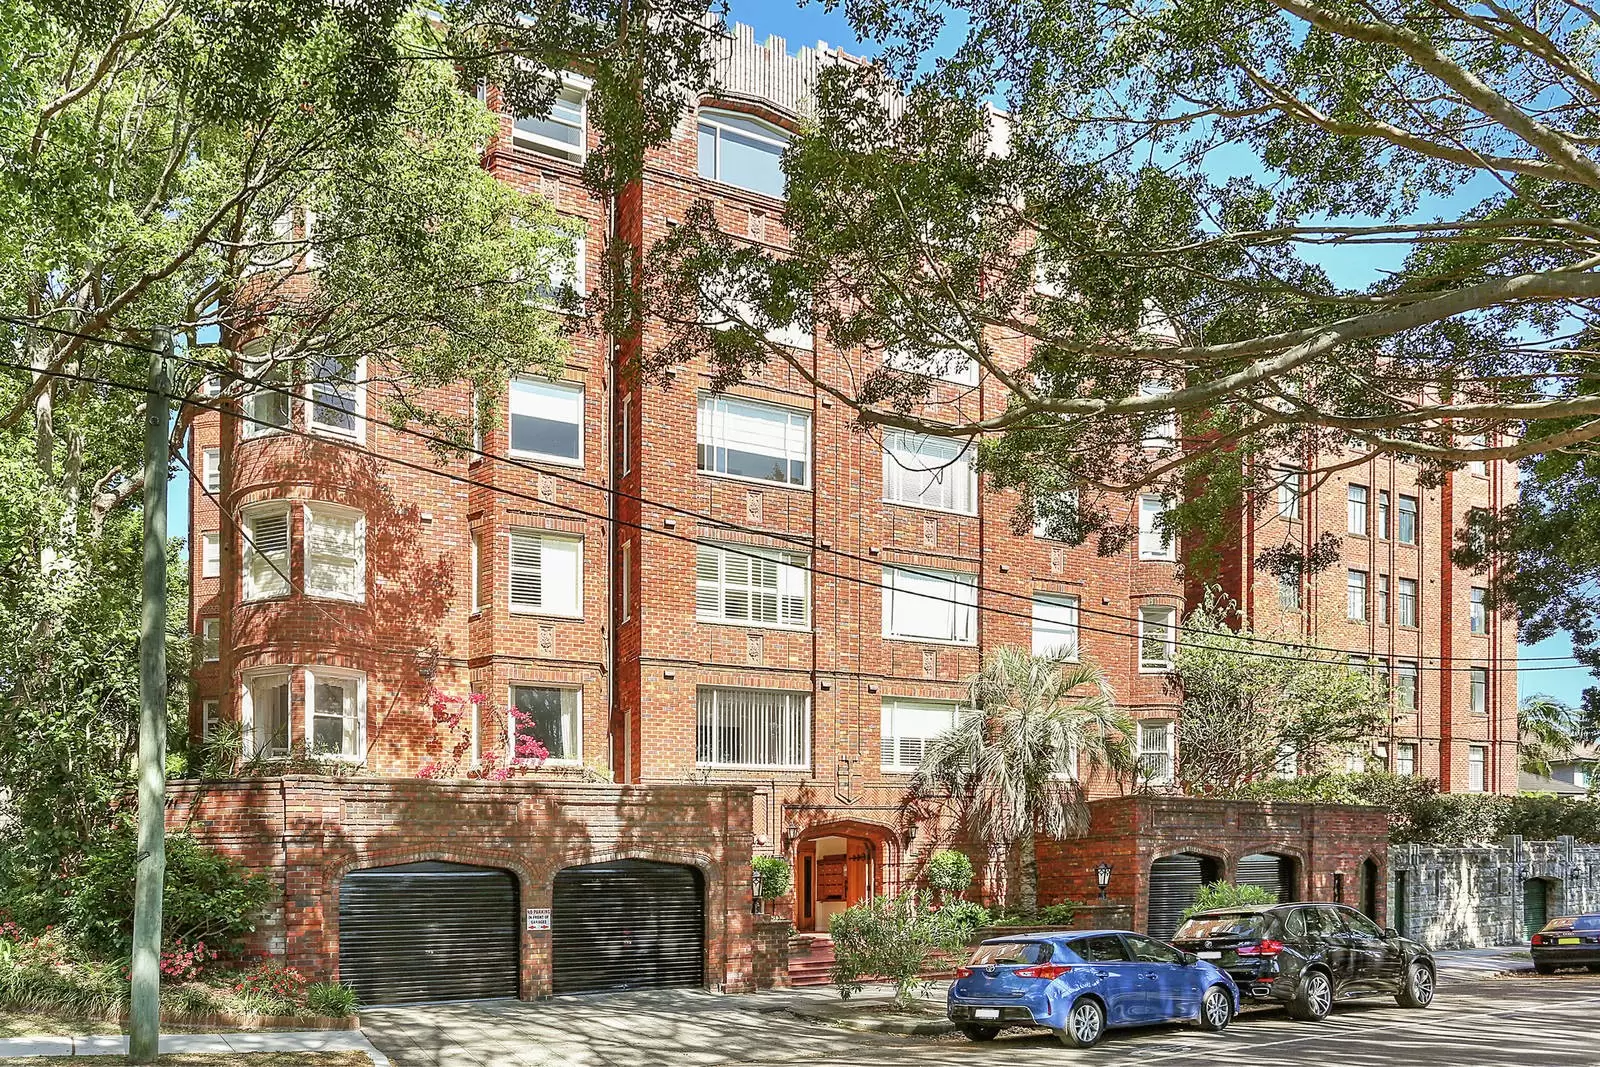 Photo #9: 4/410 Edgecliff Road, Woollahra - Sold by Sydney Sotheby's International Realty